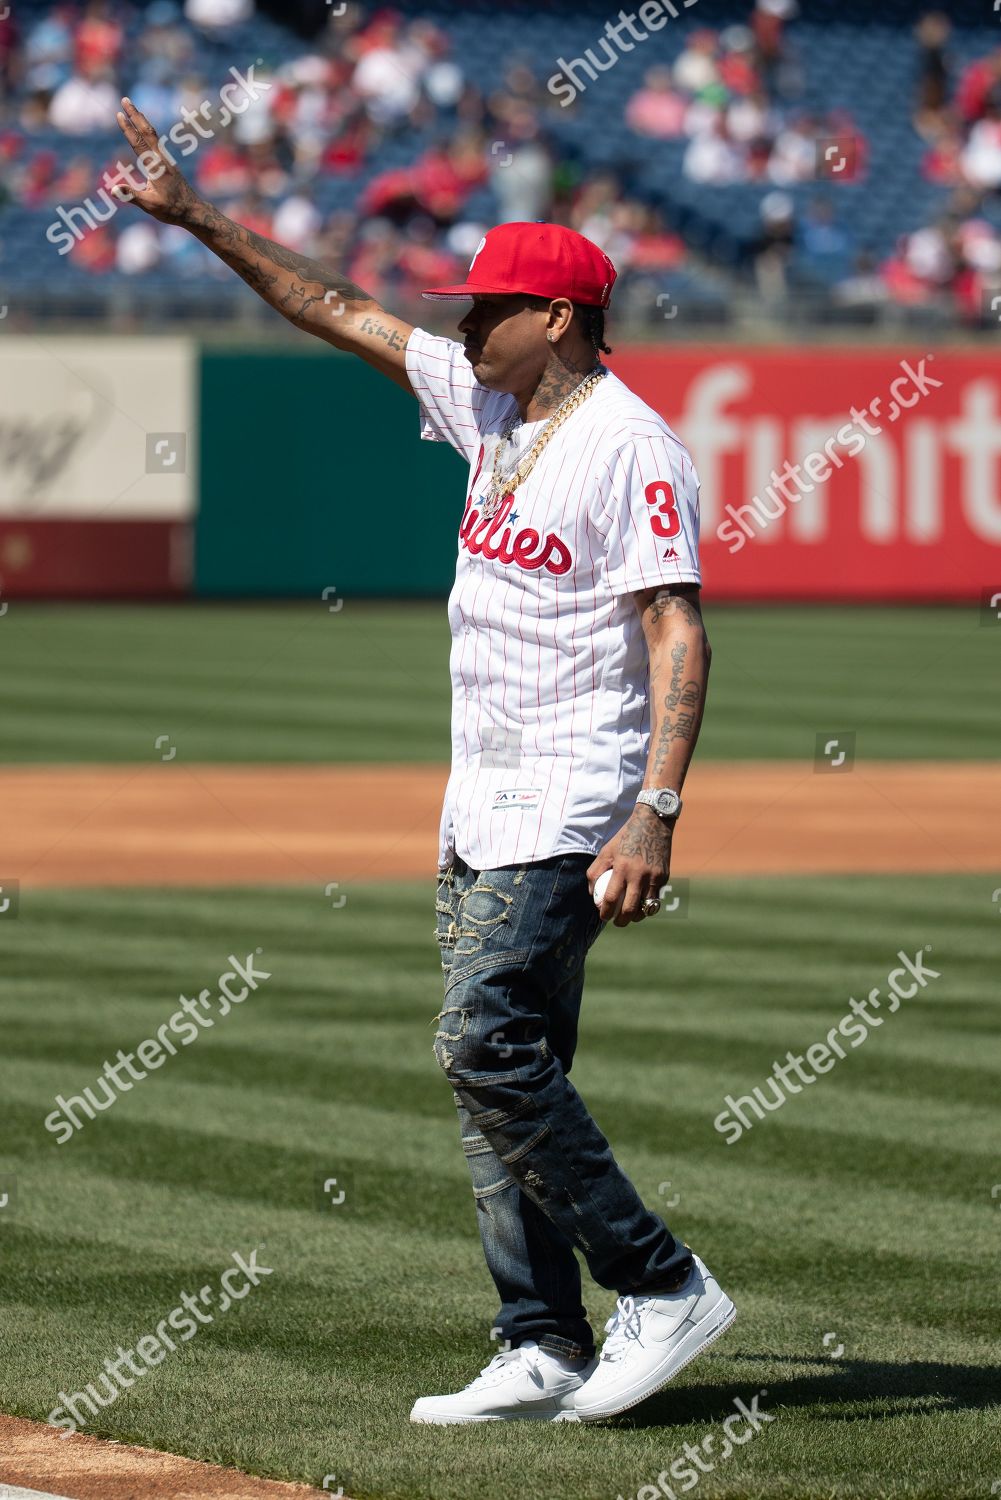 76ers Hall Famer Allen Iverson 3 Editorial Stock Photo - Stock